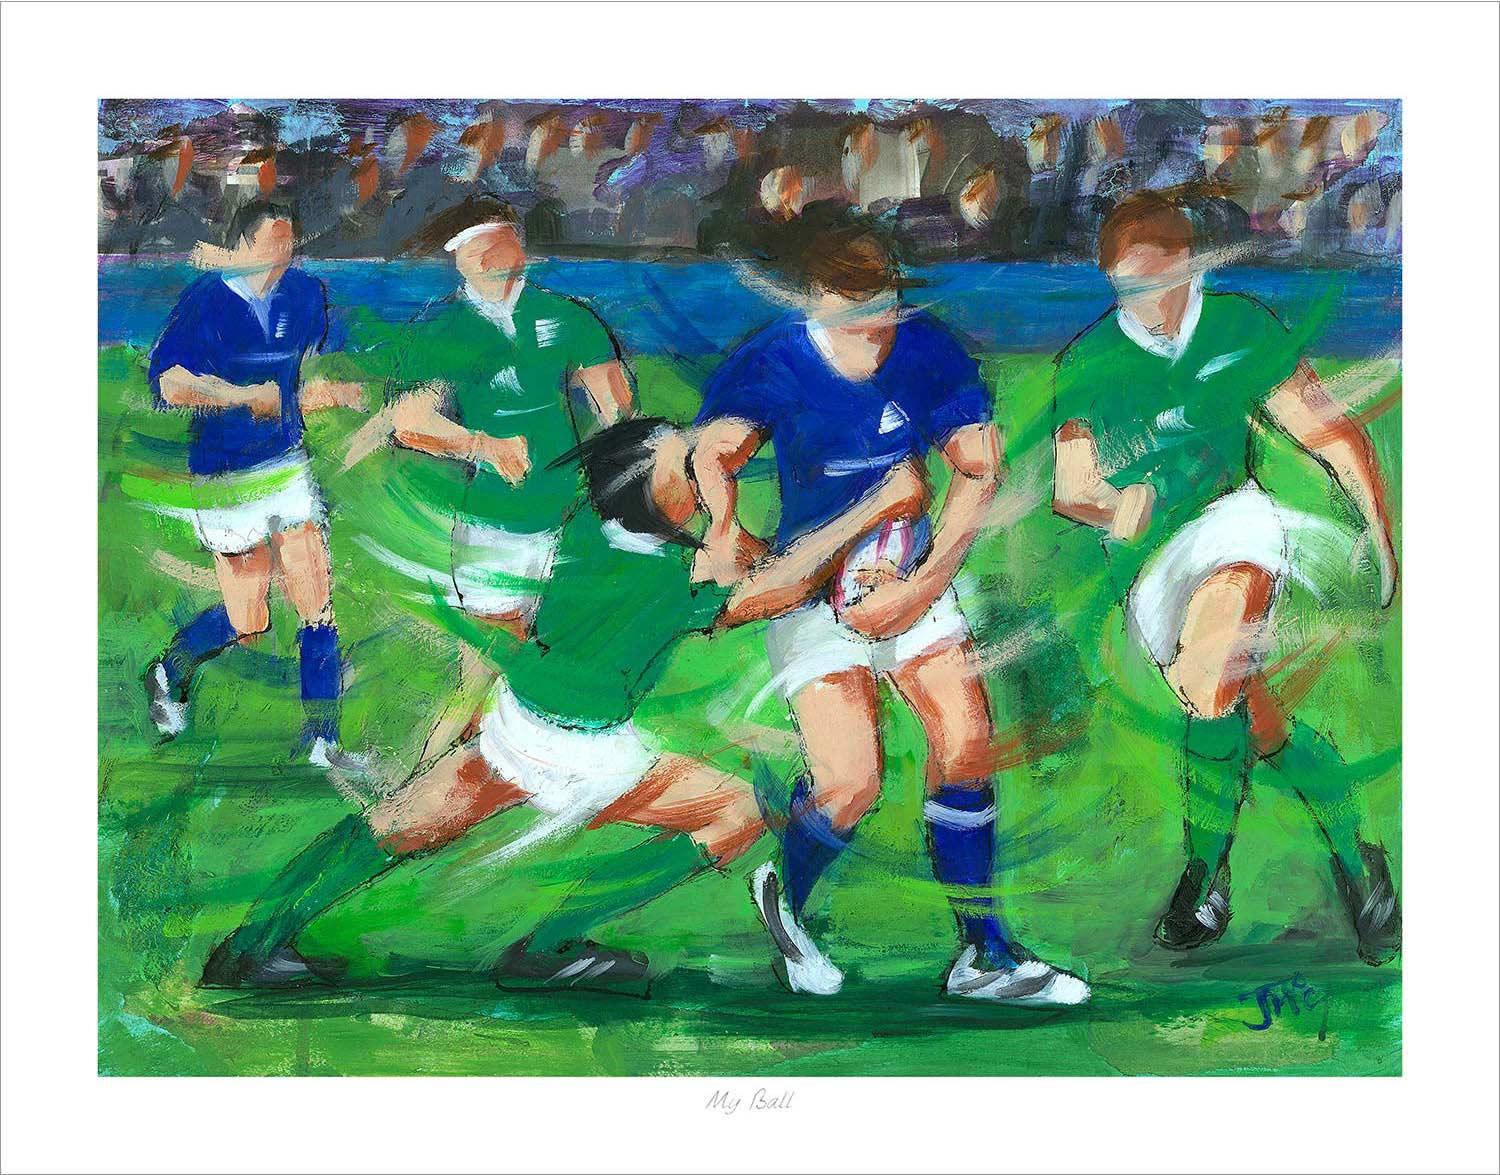 My Ball Art Print from an original painting by artist Janet McCrorie